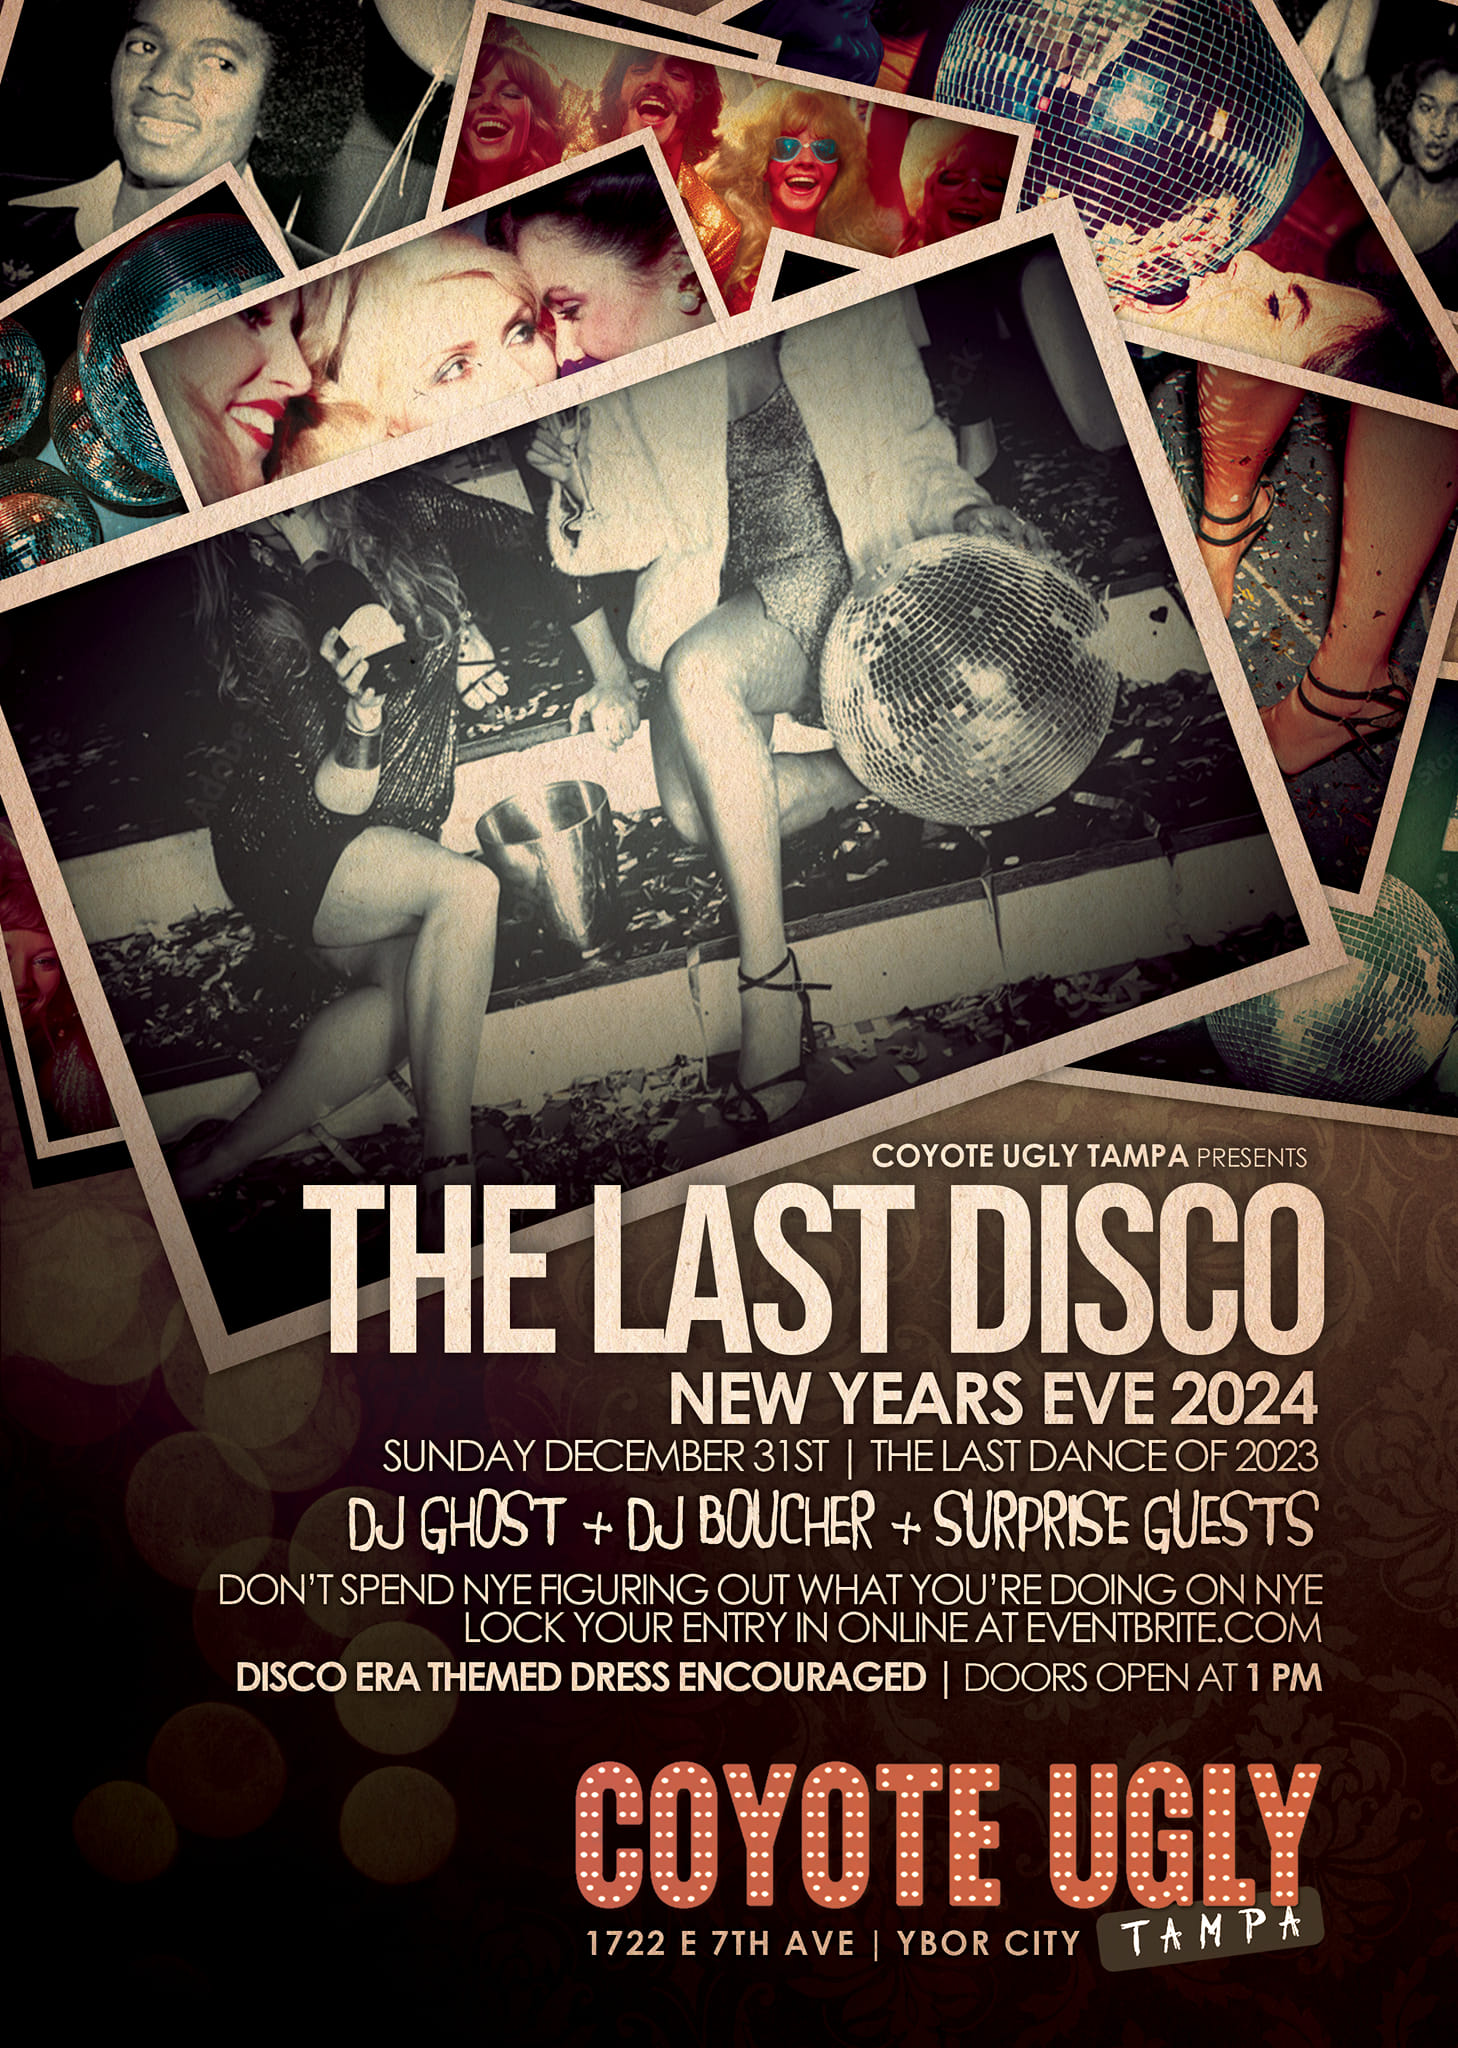 Tampa: New Year’s Eve – The Last Disco: December 31, 2023